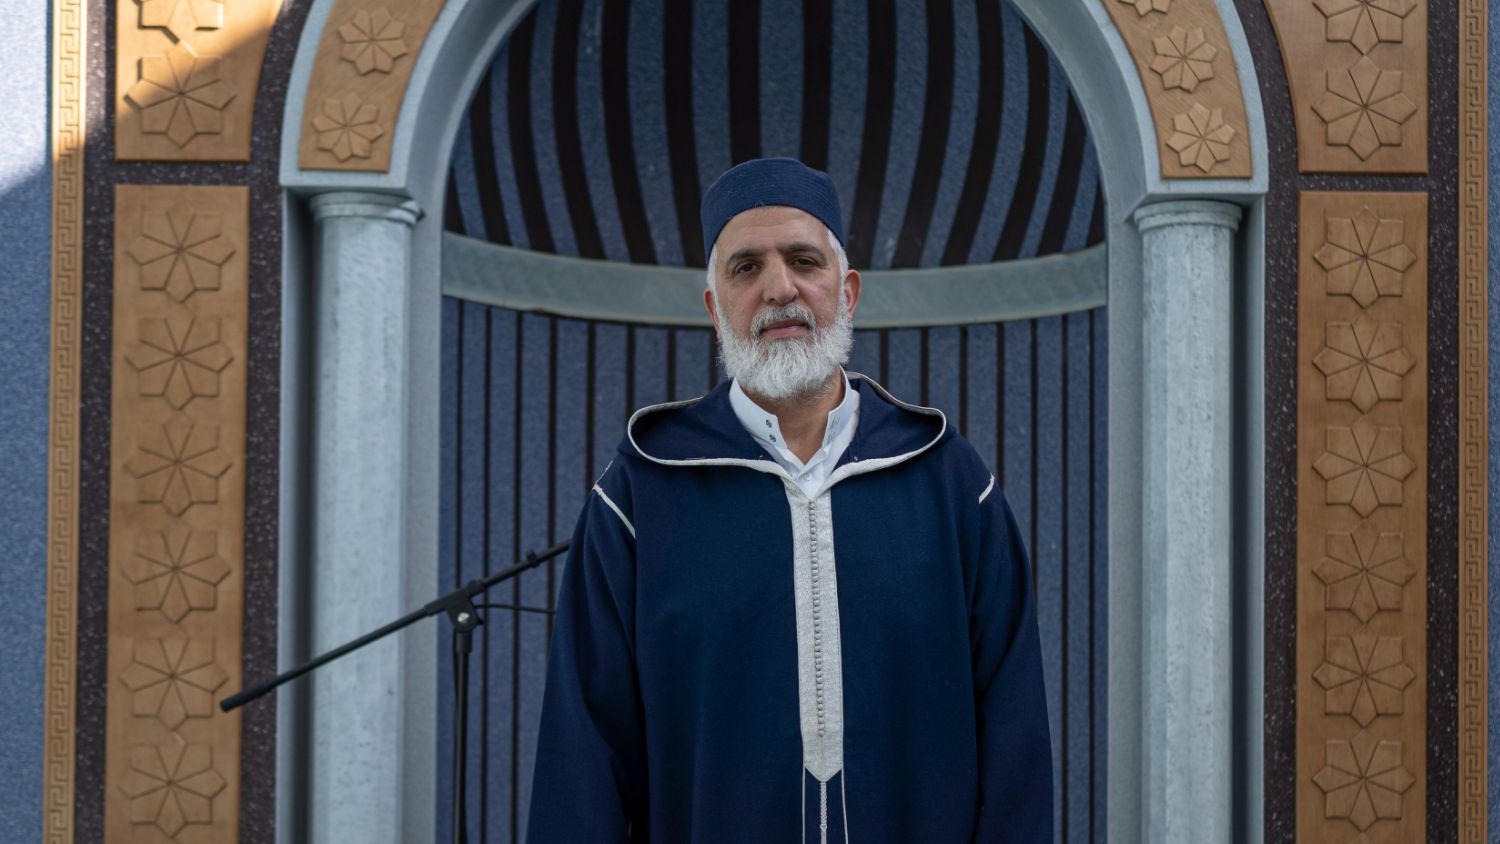 Mohammed Zaki moved to Greece from Morocco some 30 years ago and is now the imam of Votanikos Mosque (Patrick Strickland/MEE)